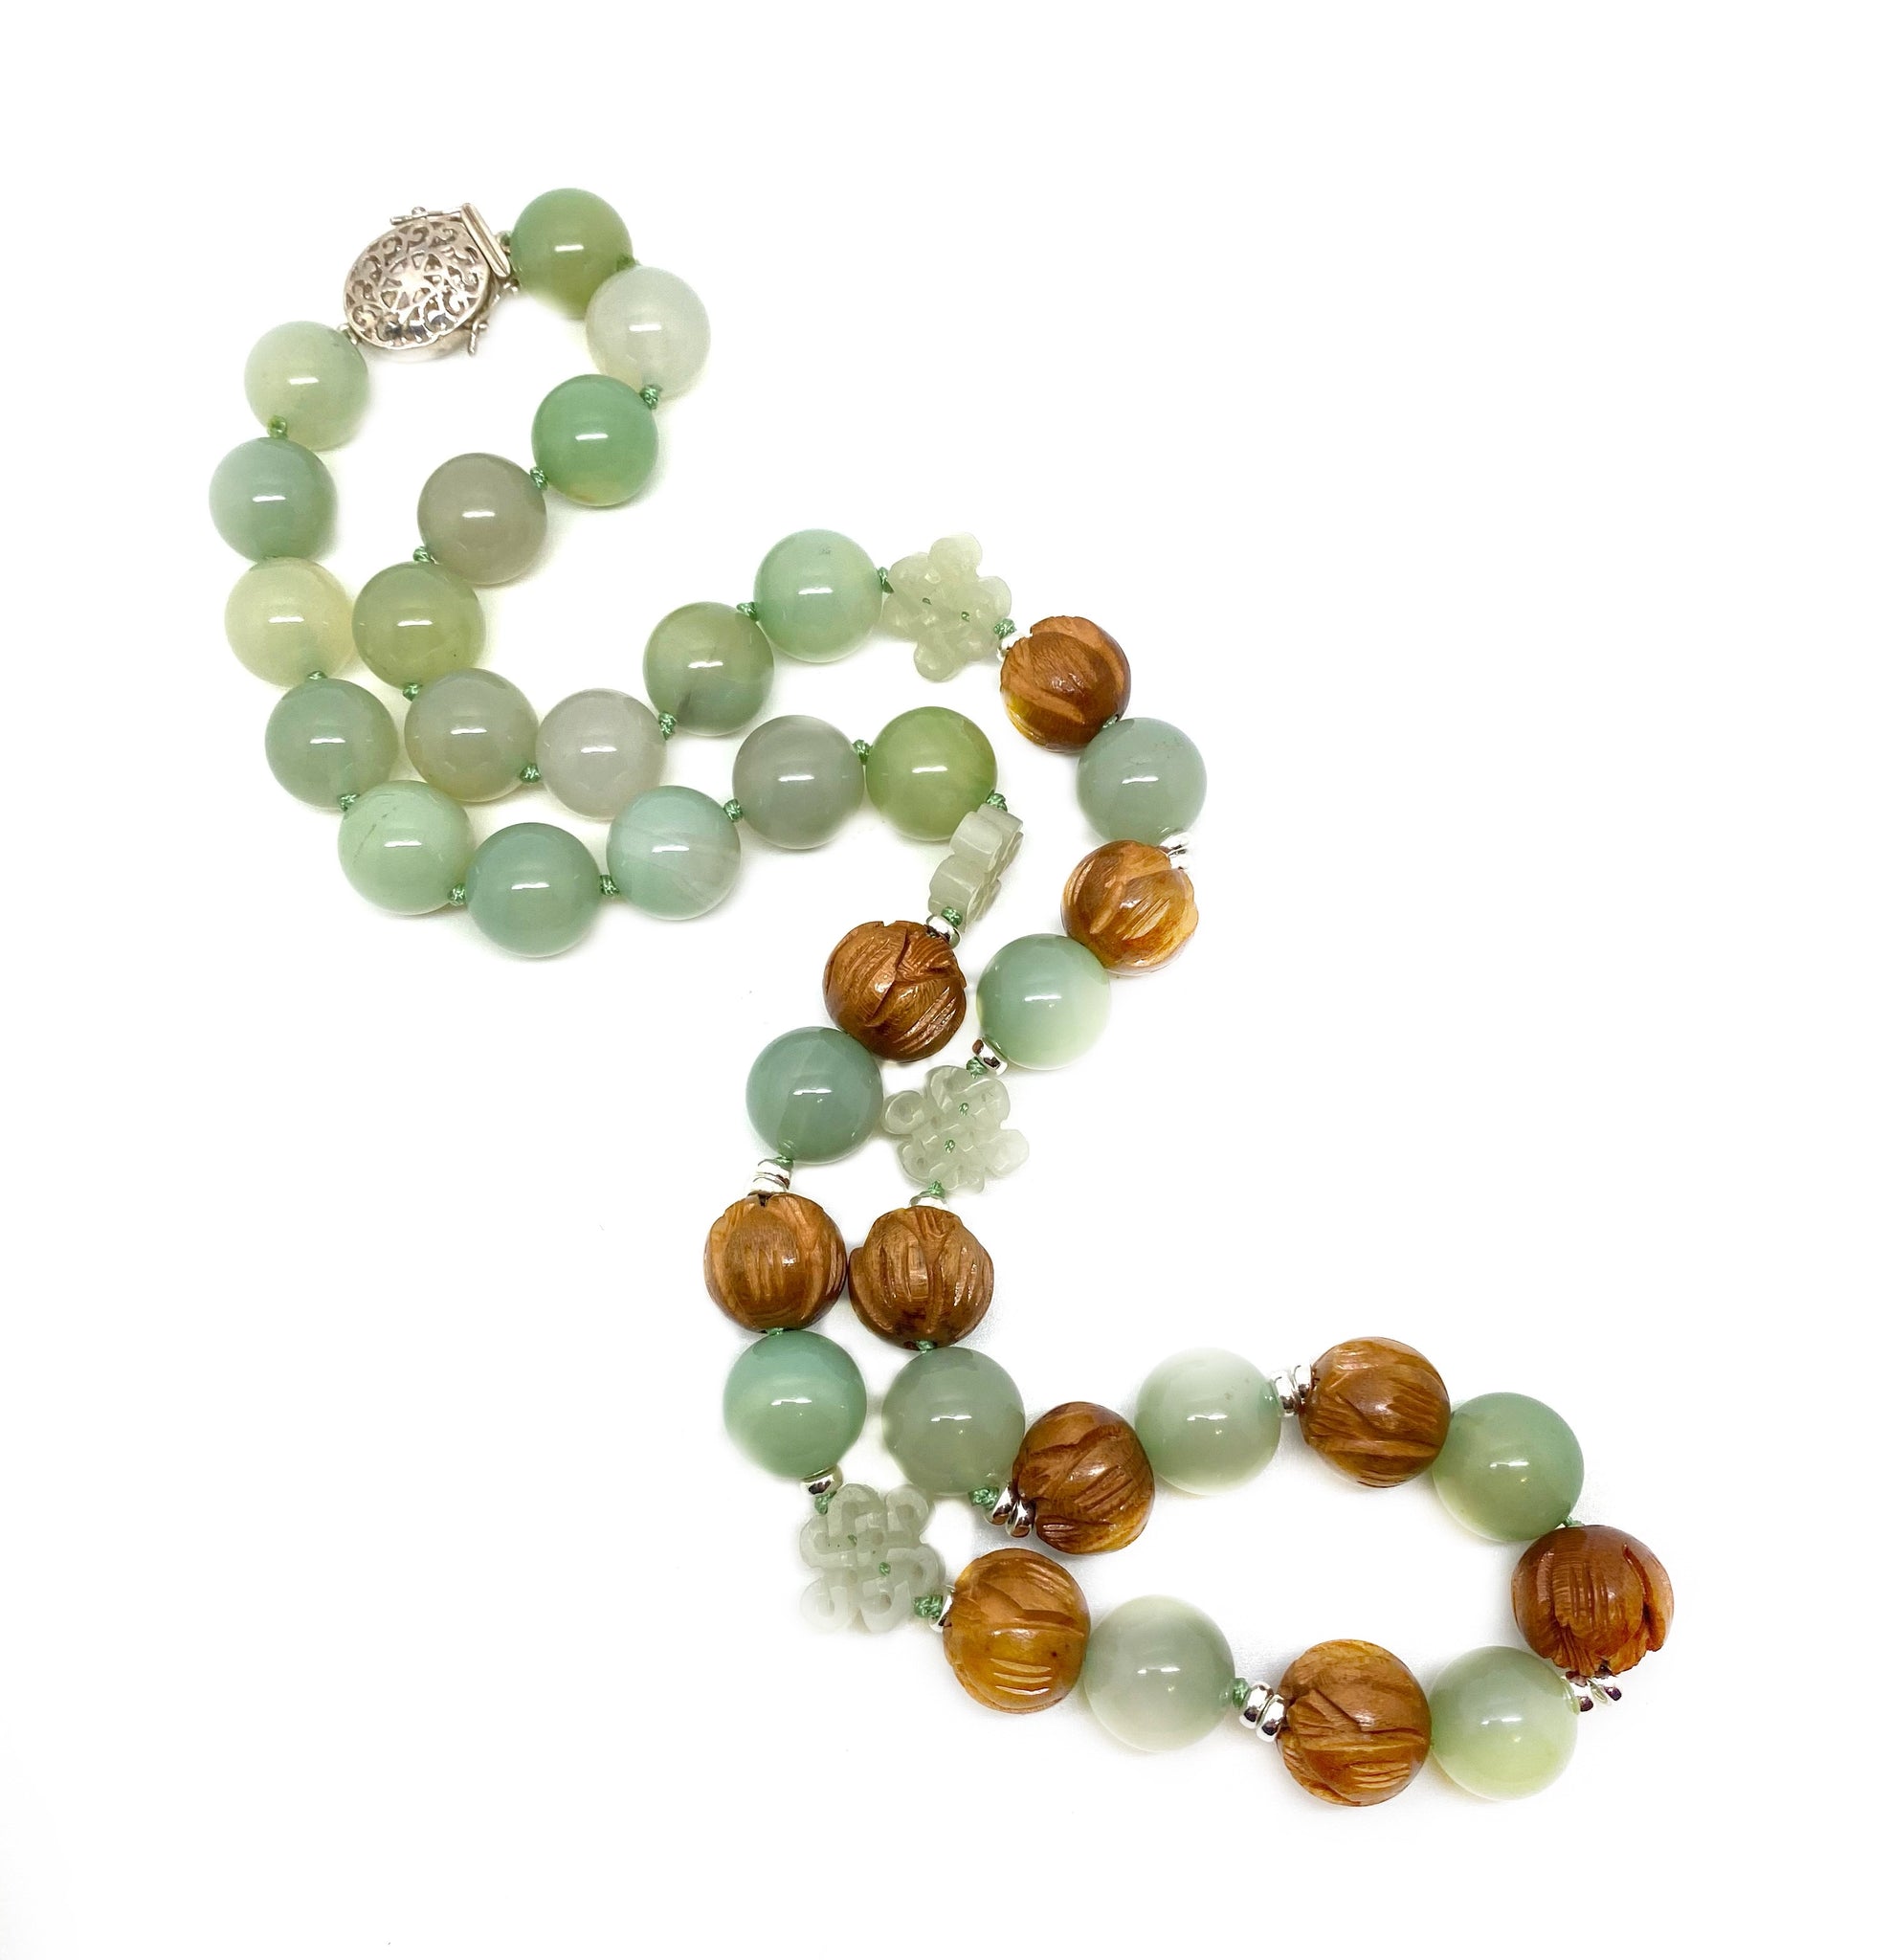 SOLD - NEW - Jade, Sterling and Wooden beads necklace